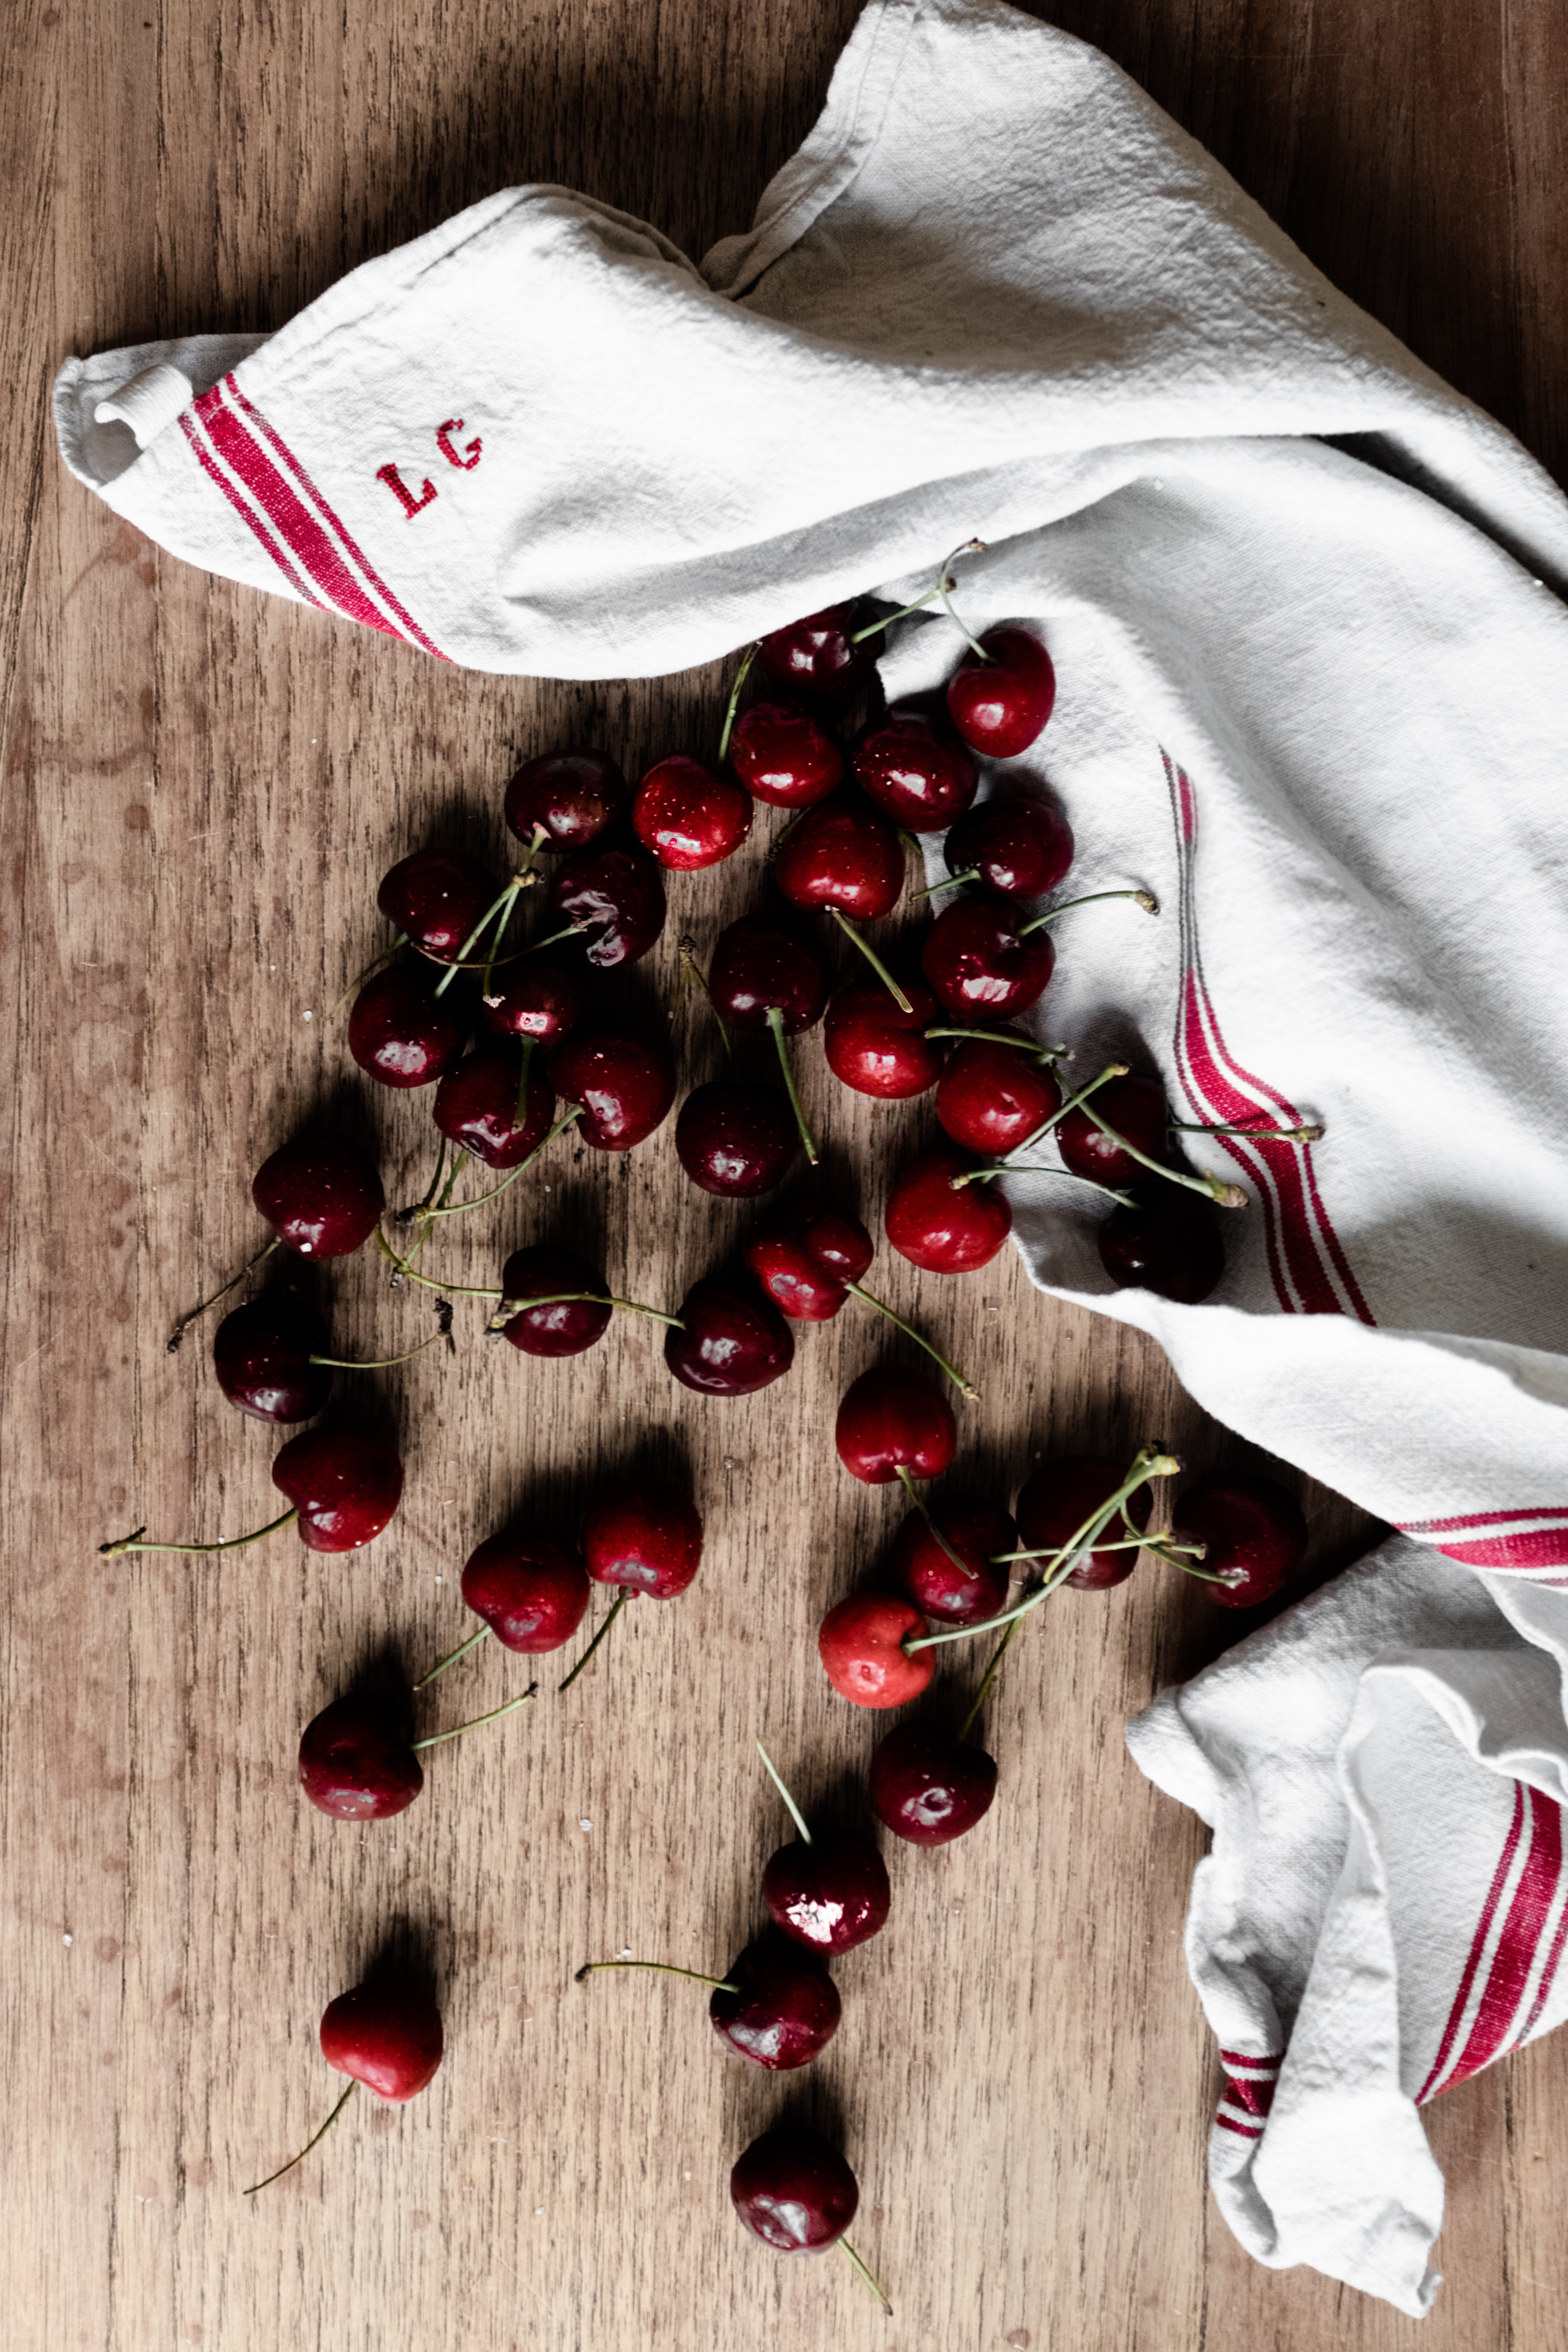 sweet cherry, food, cherry, wood, wooden, cloth, fruit